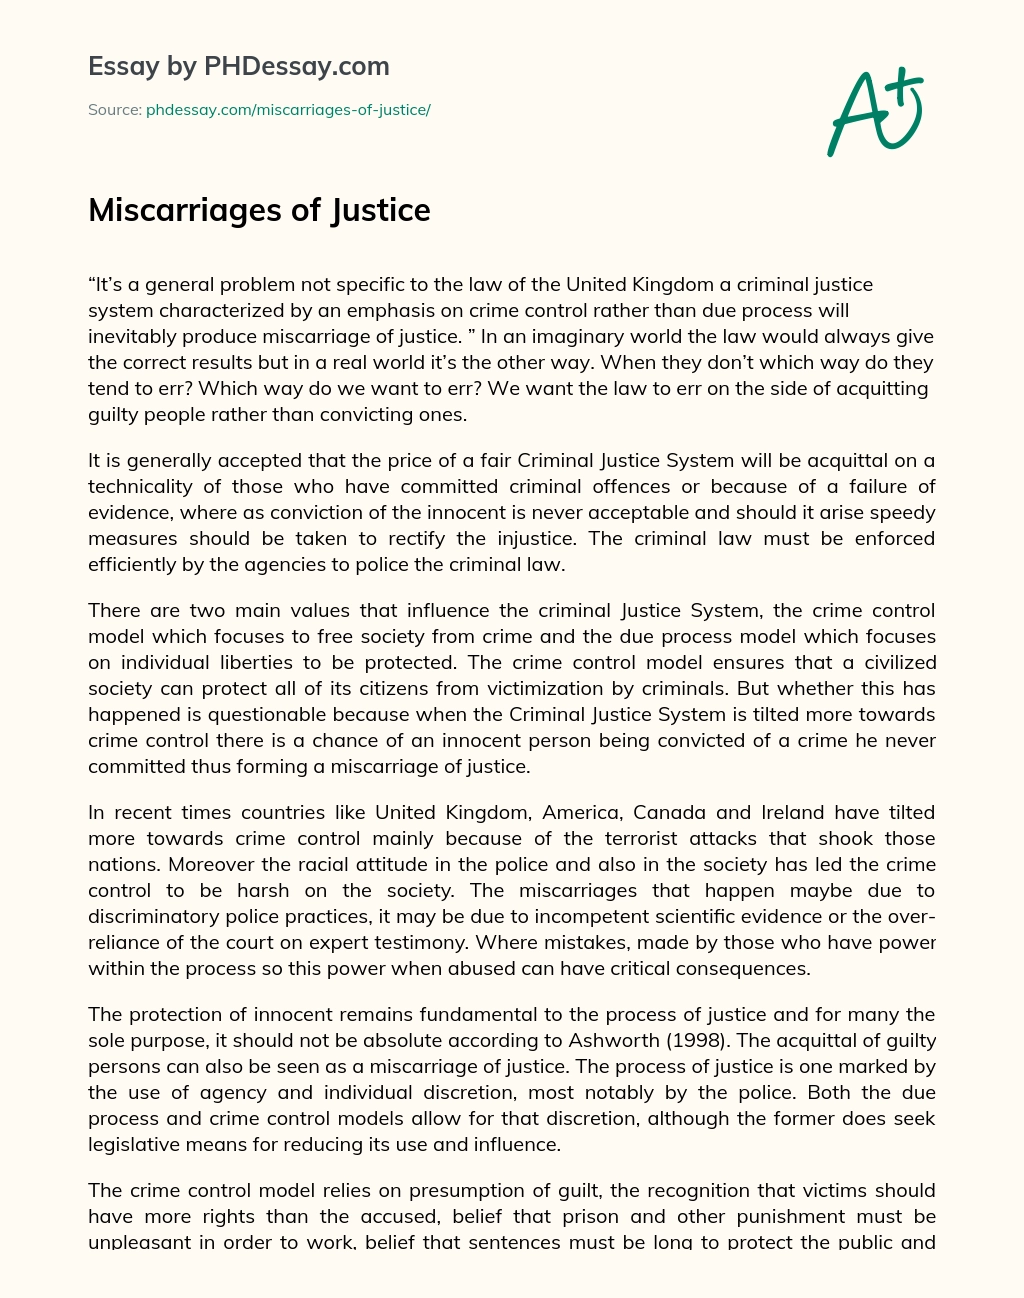 Miscarriages of Justice essay